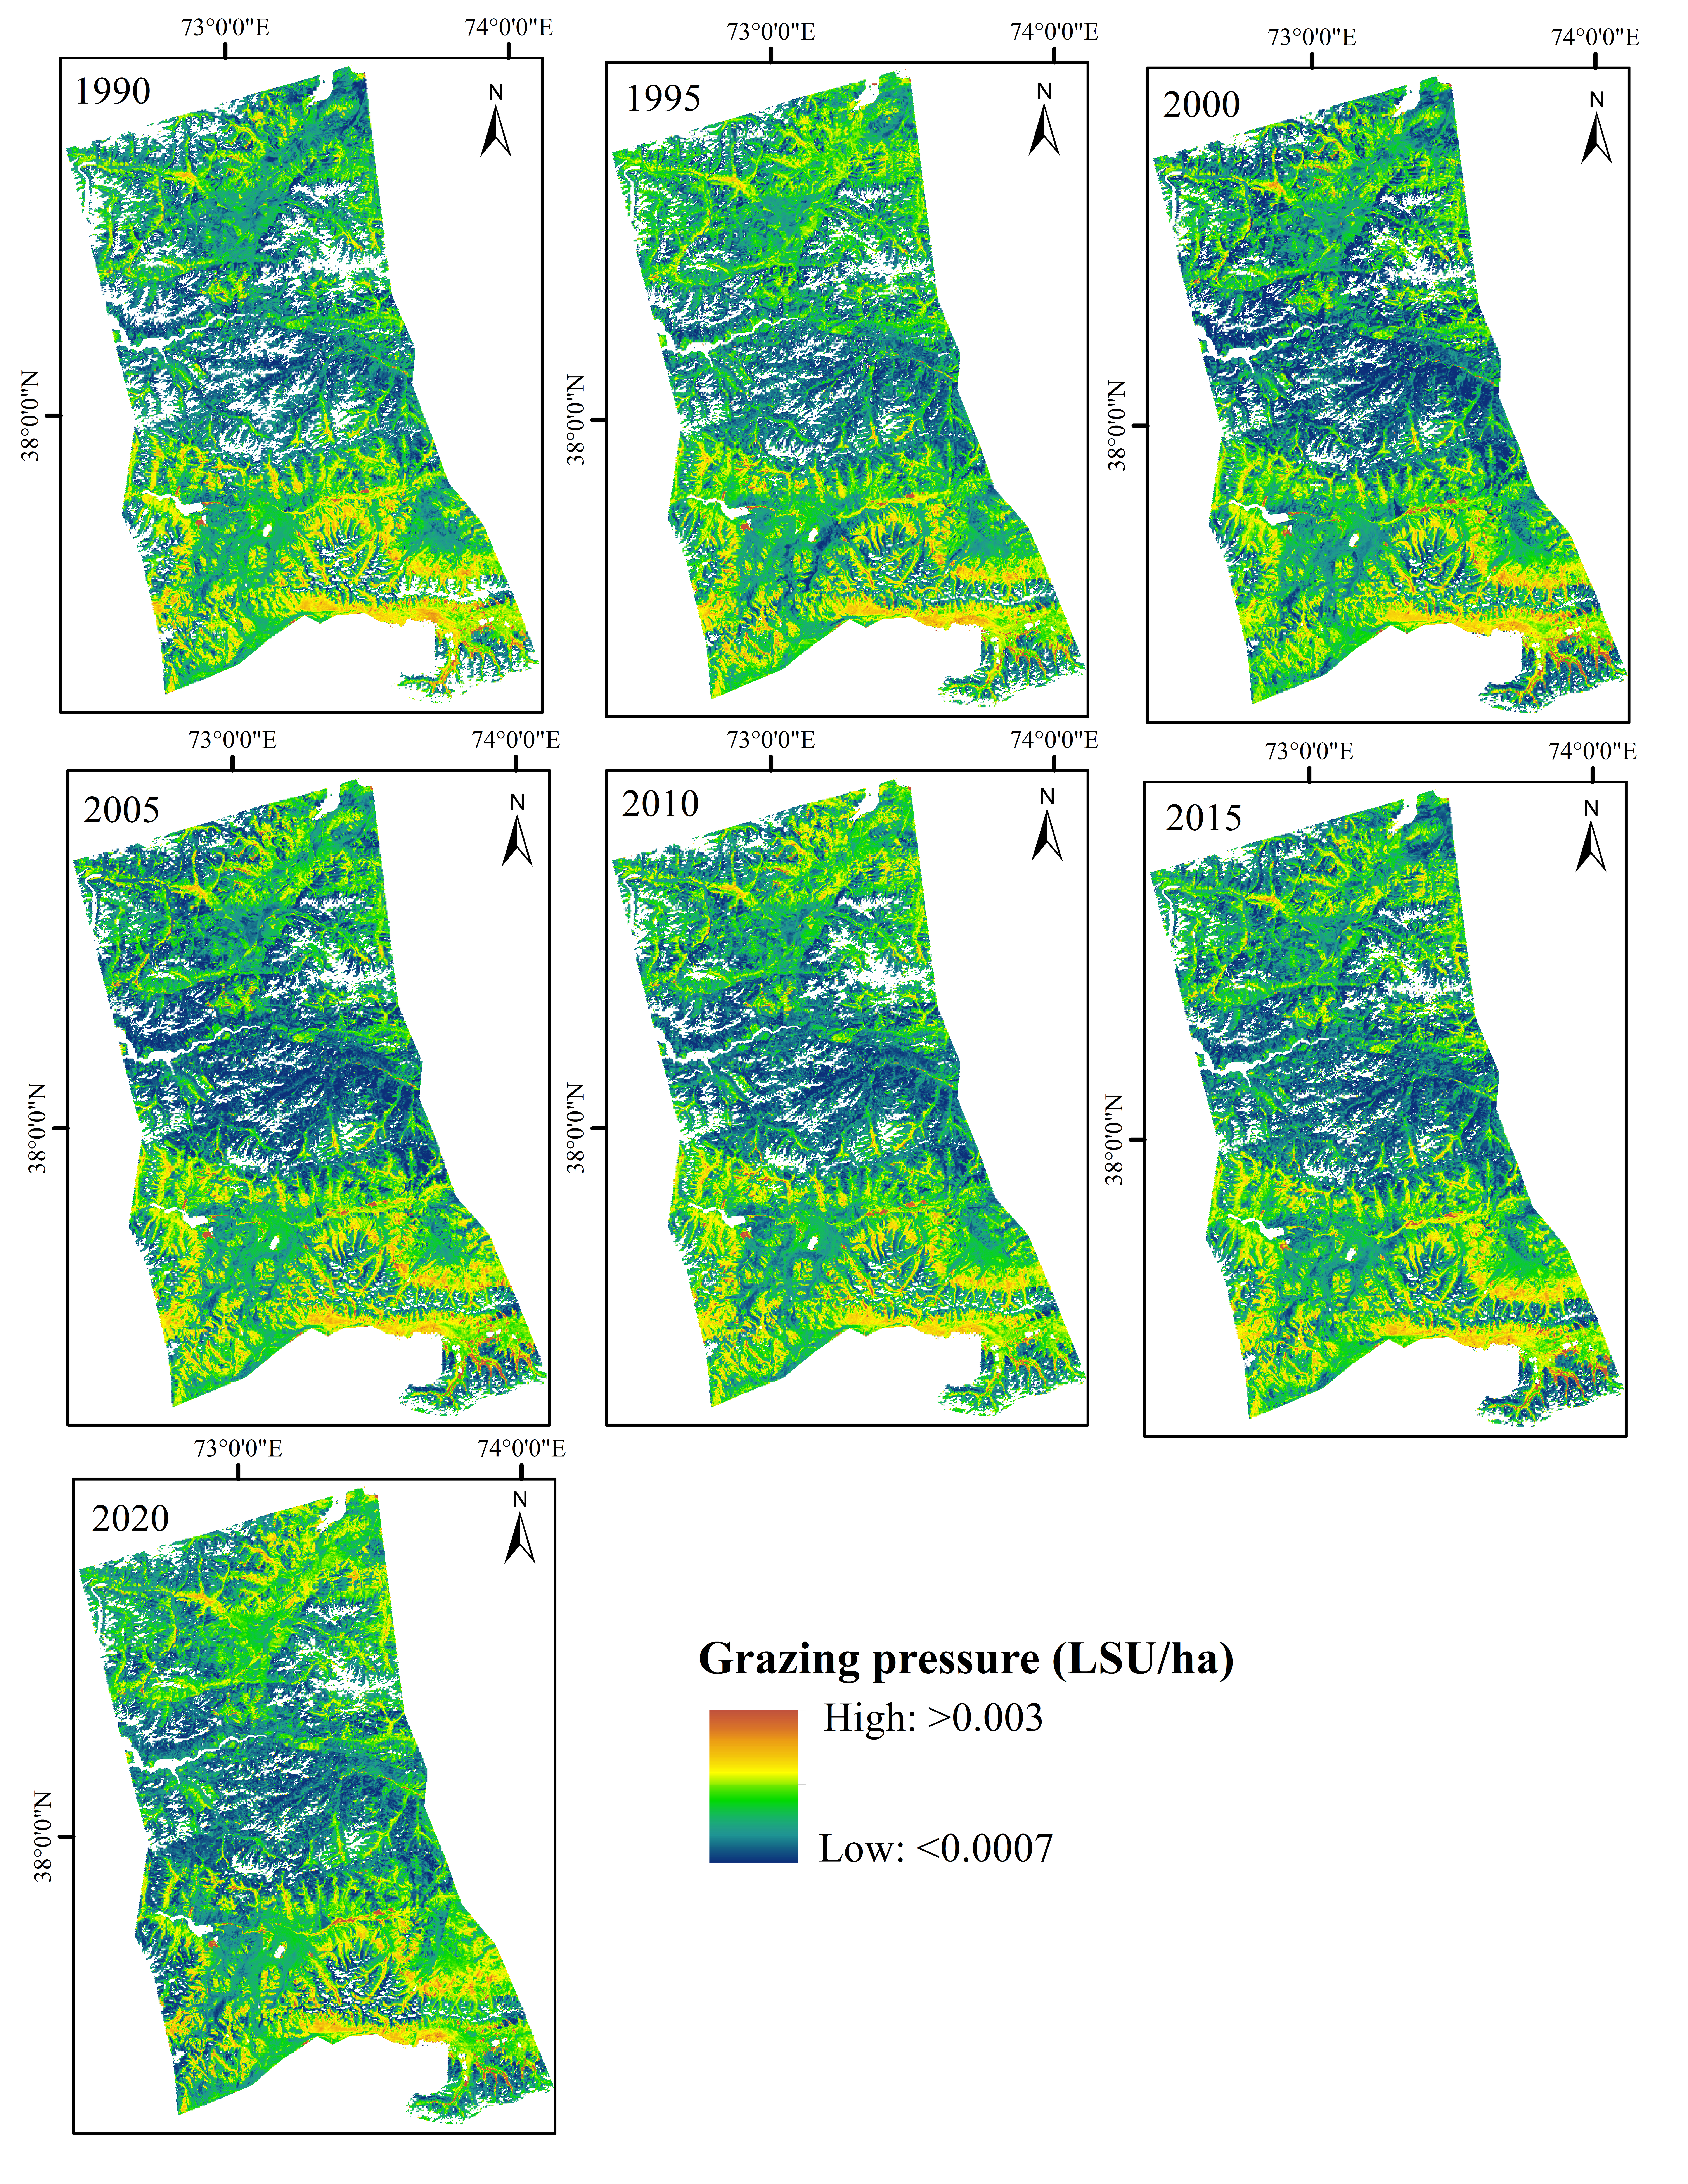 Spatial and temporal pattern of grazing pressure in Tajikistan for 5-year intervals from 1990 to 2020.png